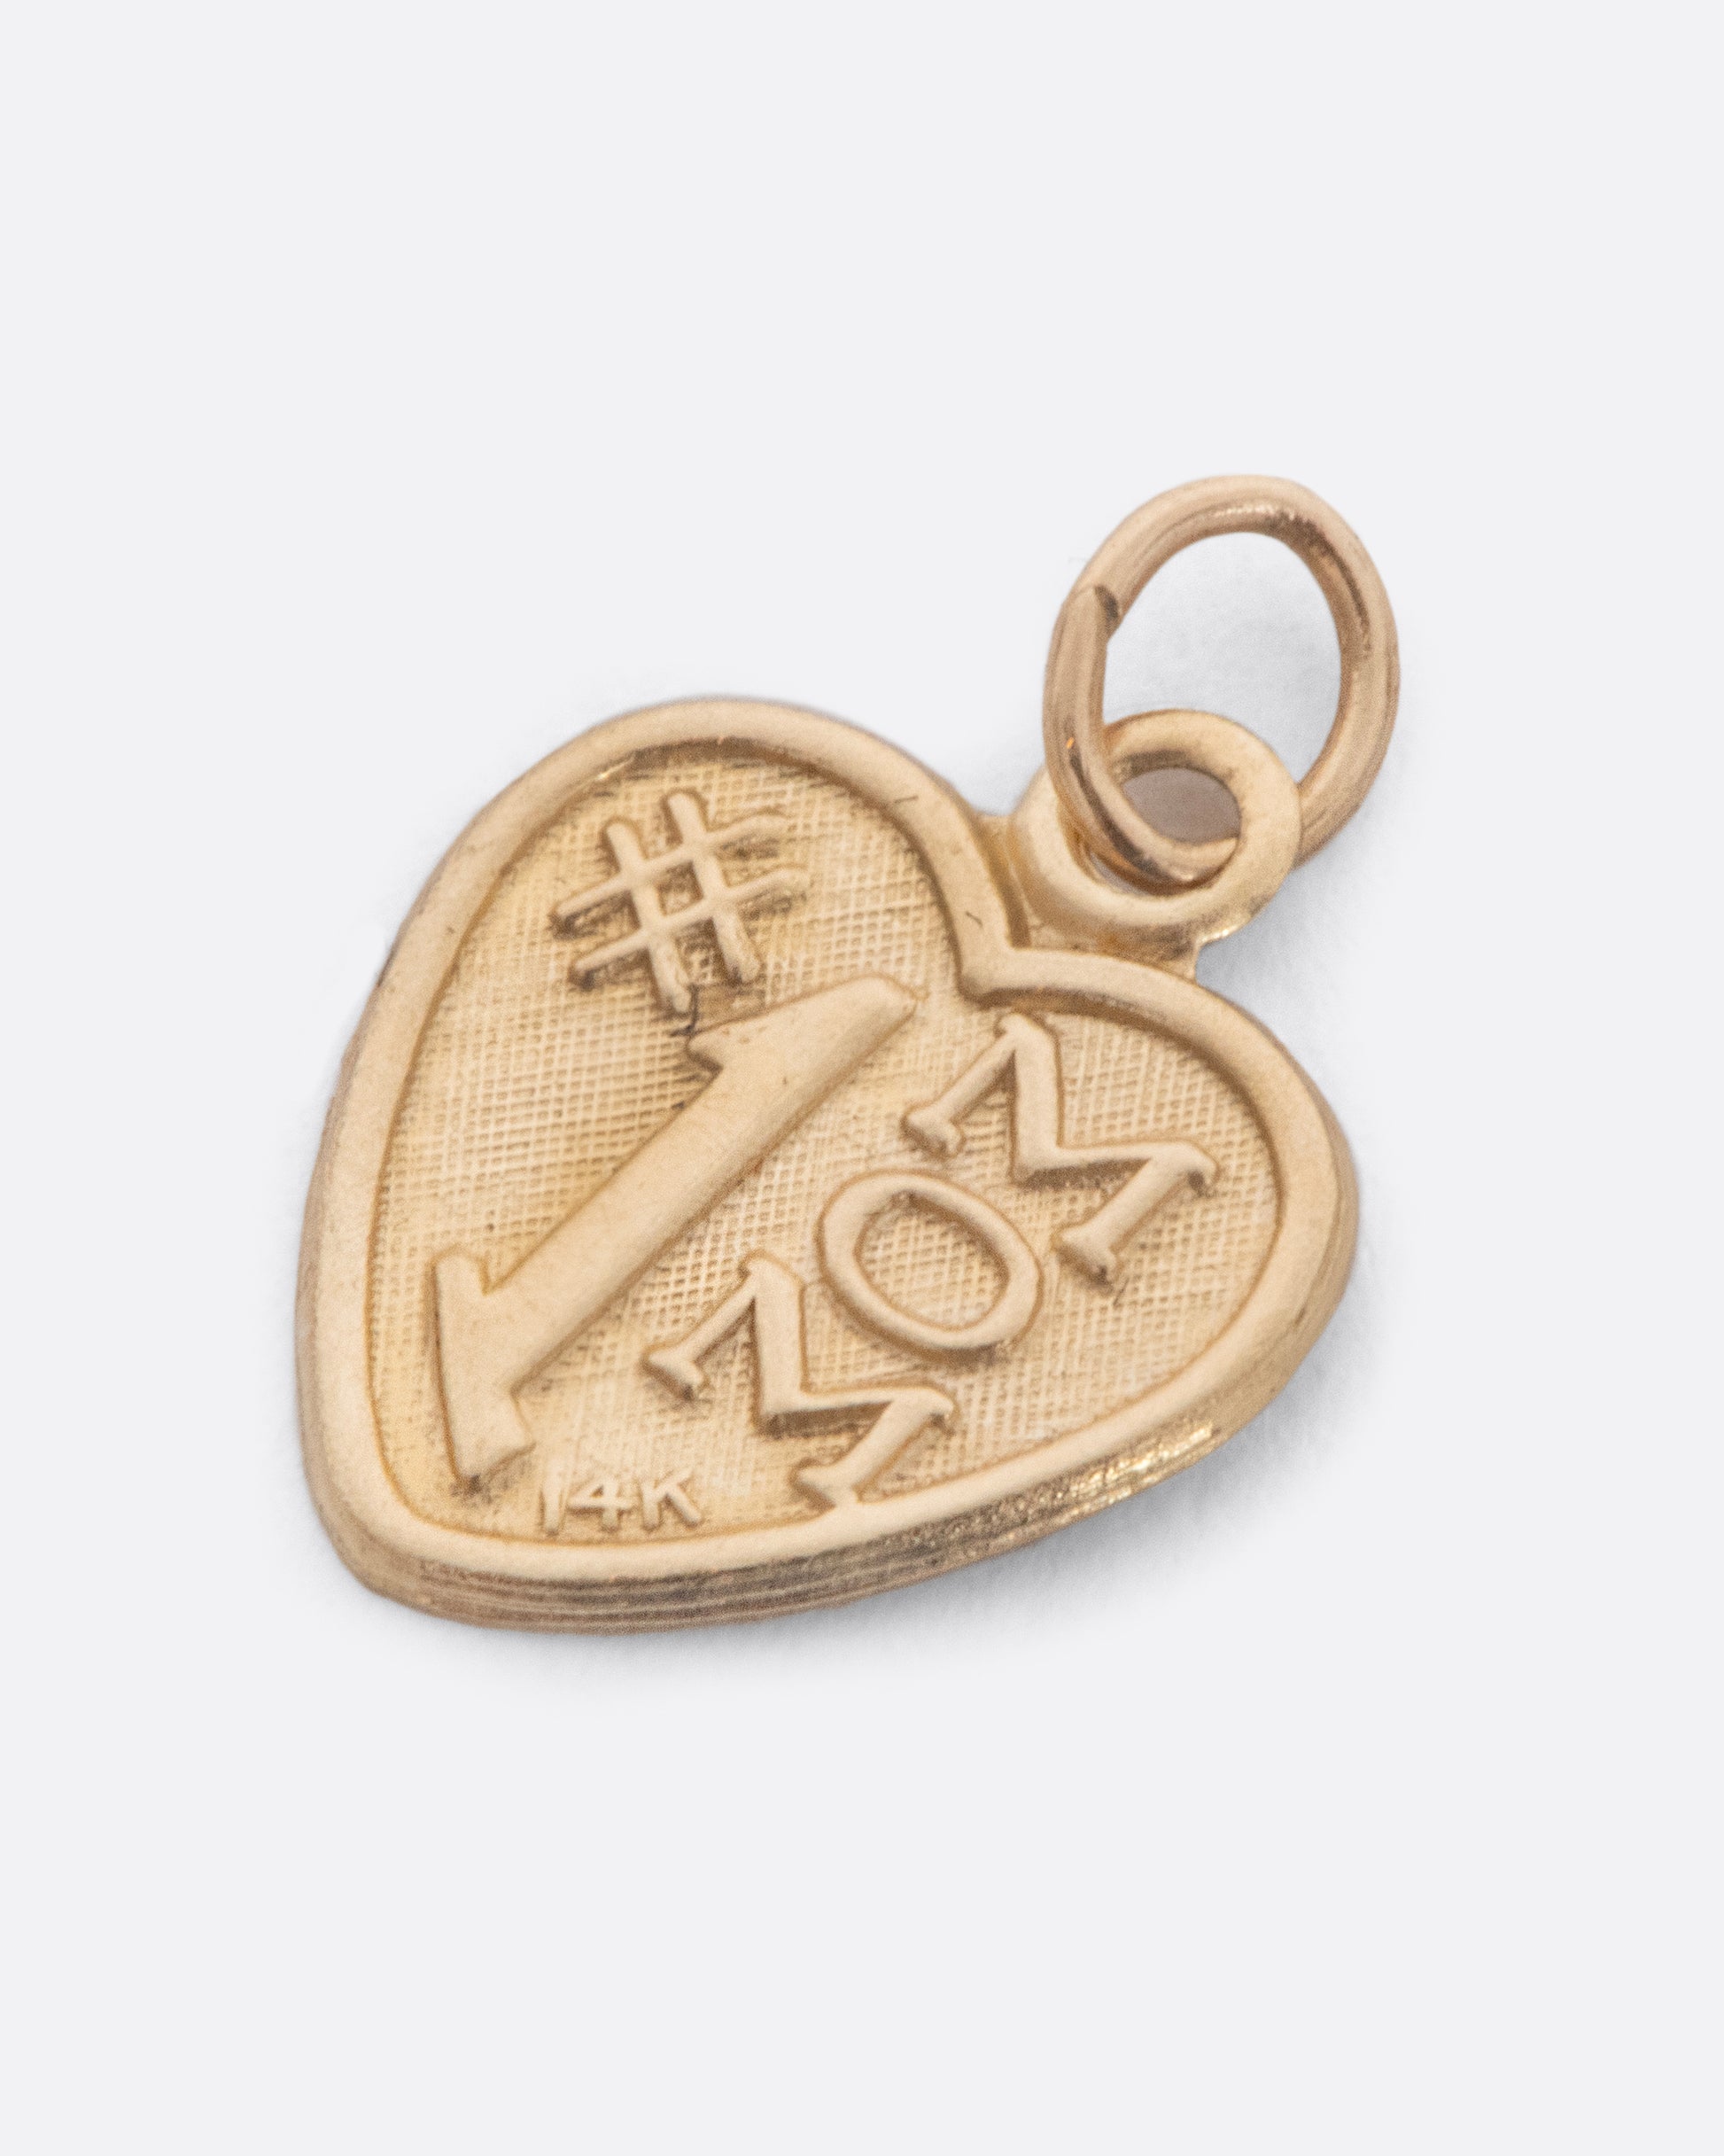 Gold heart shaped charm that reads '#1 Mom'. View from the side.